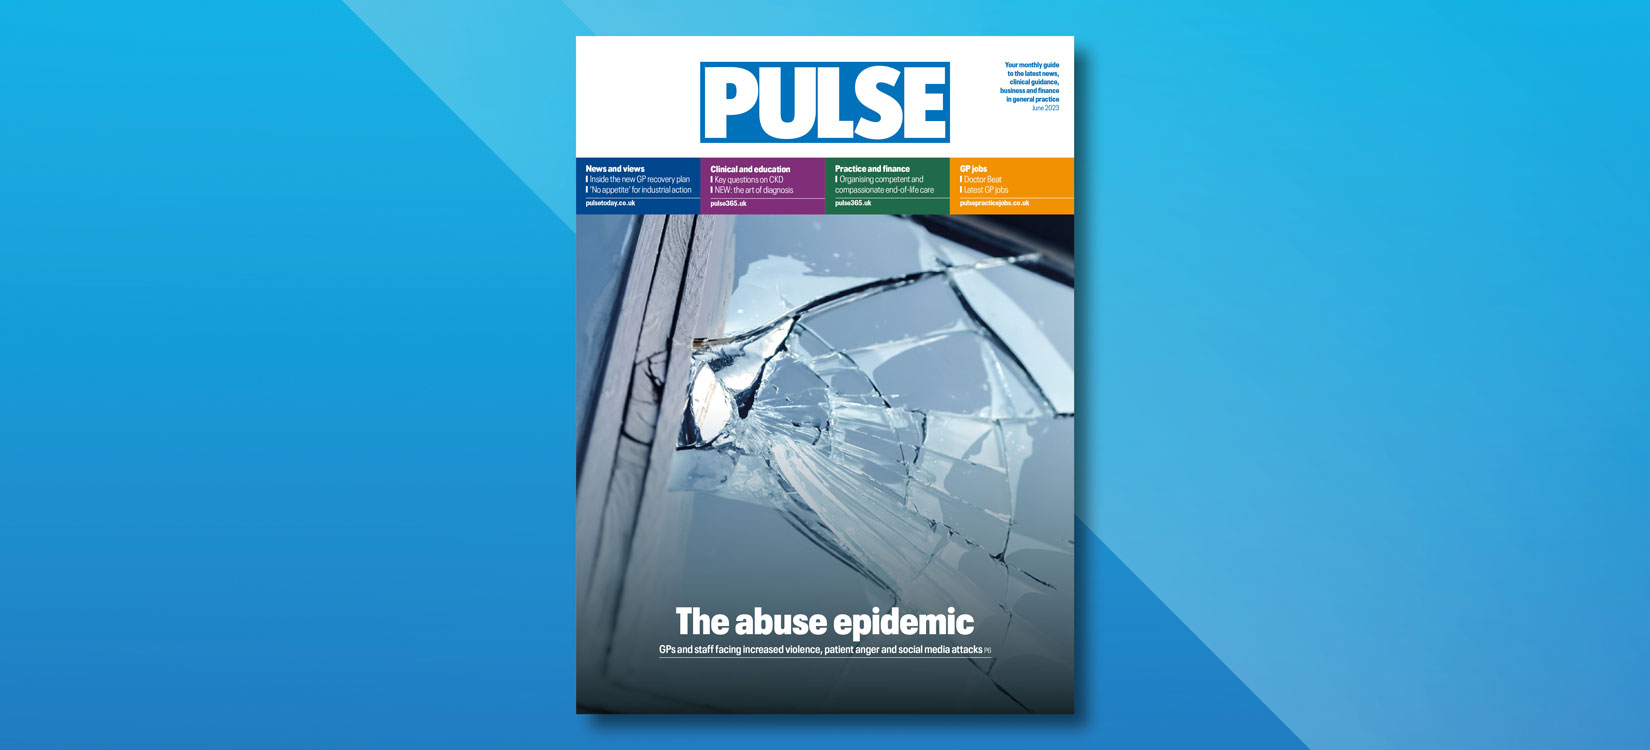 Pulse: The abuse epidemic